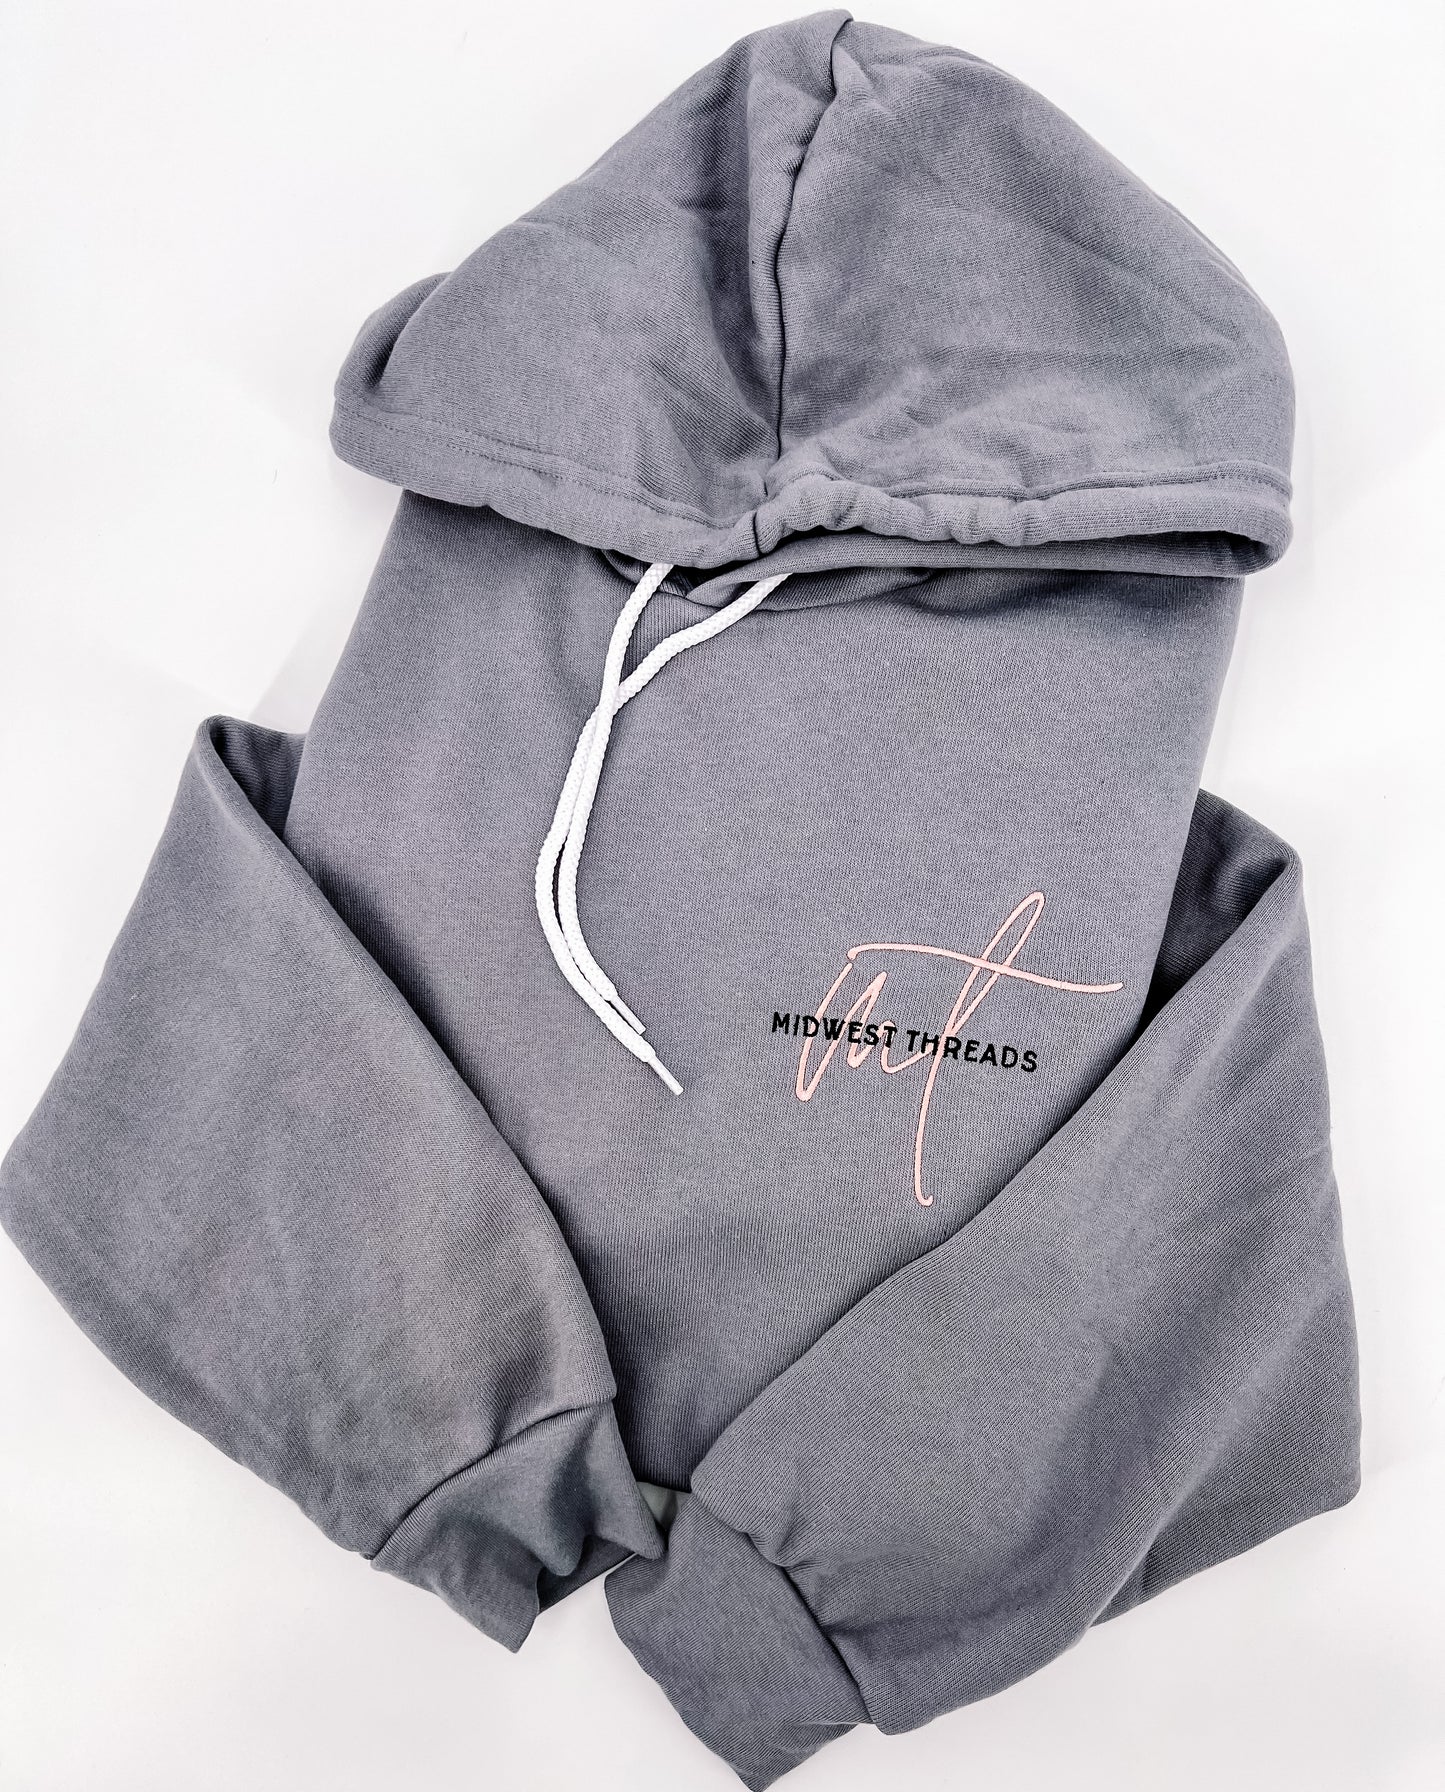 Midwest Threads Hoodie